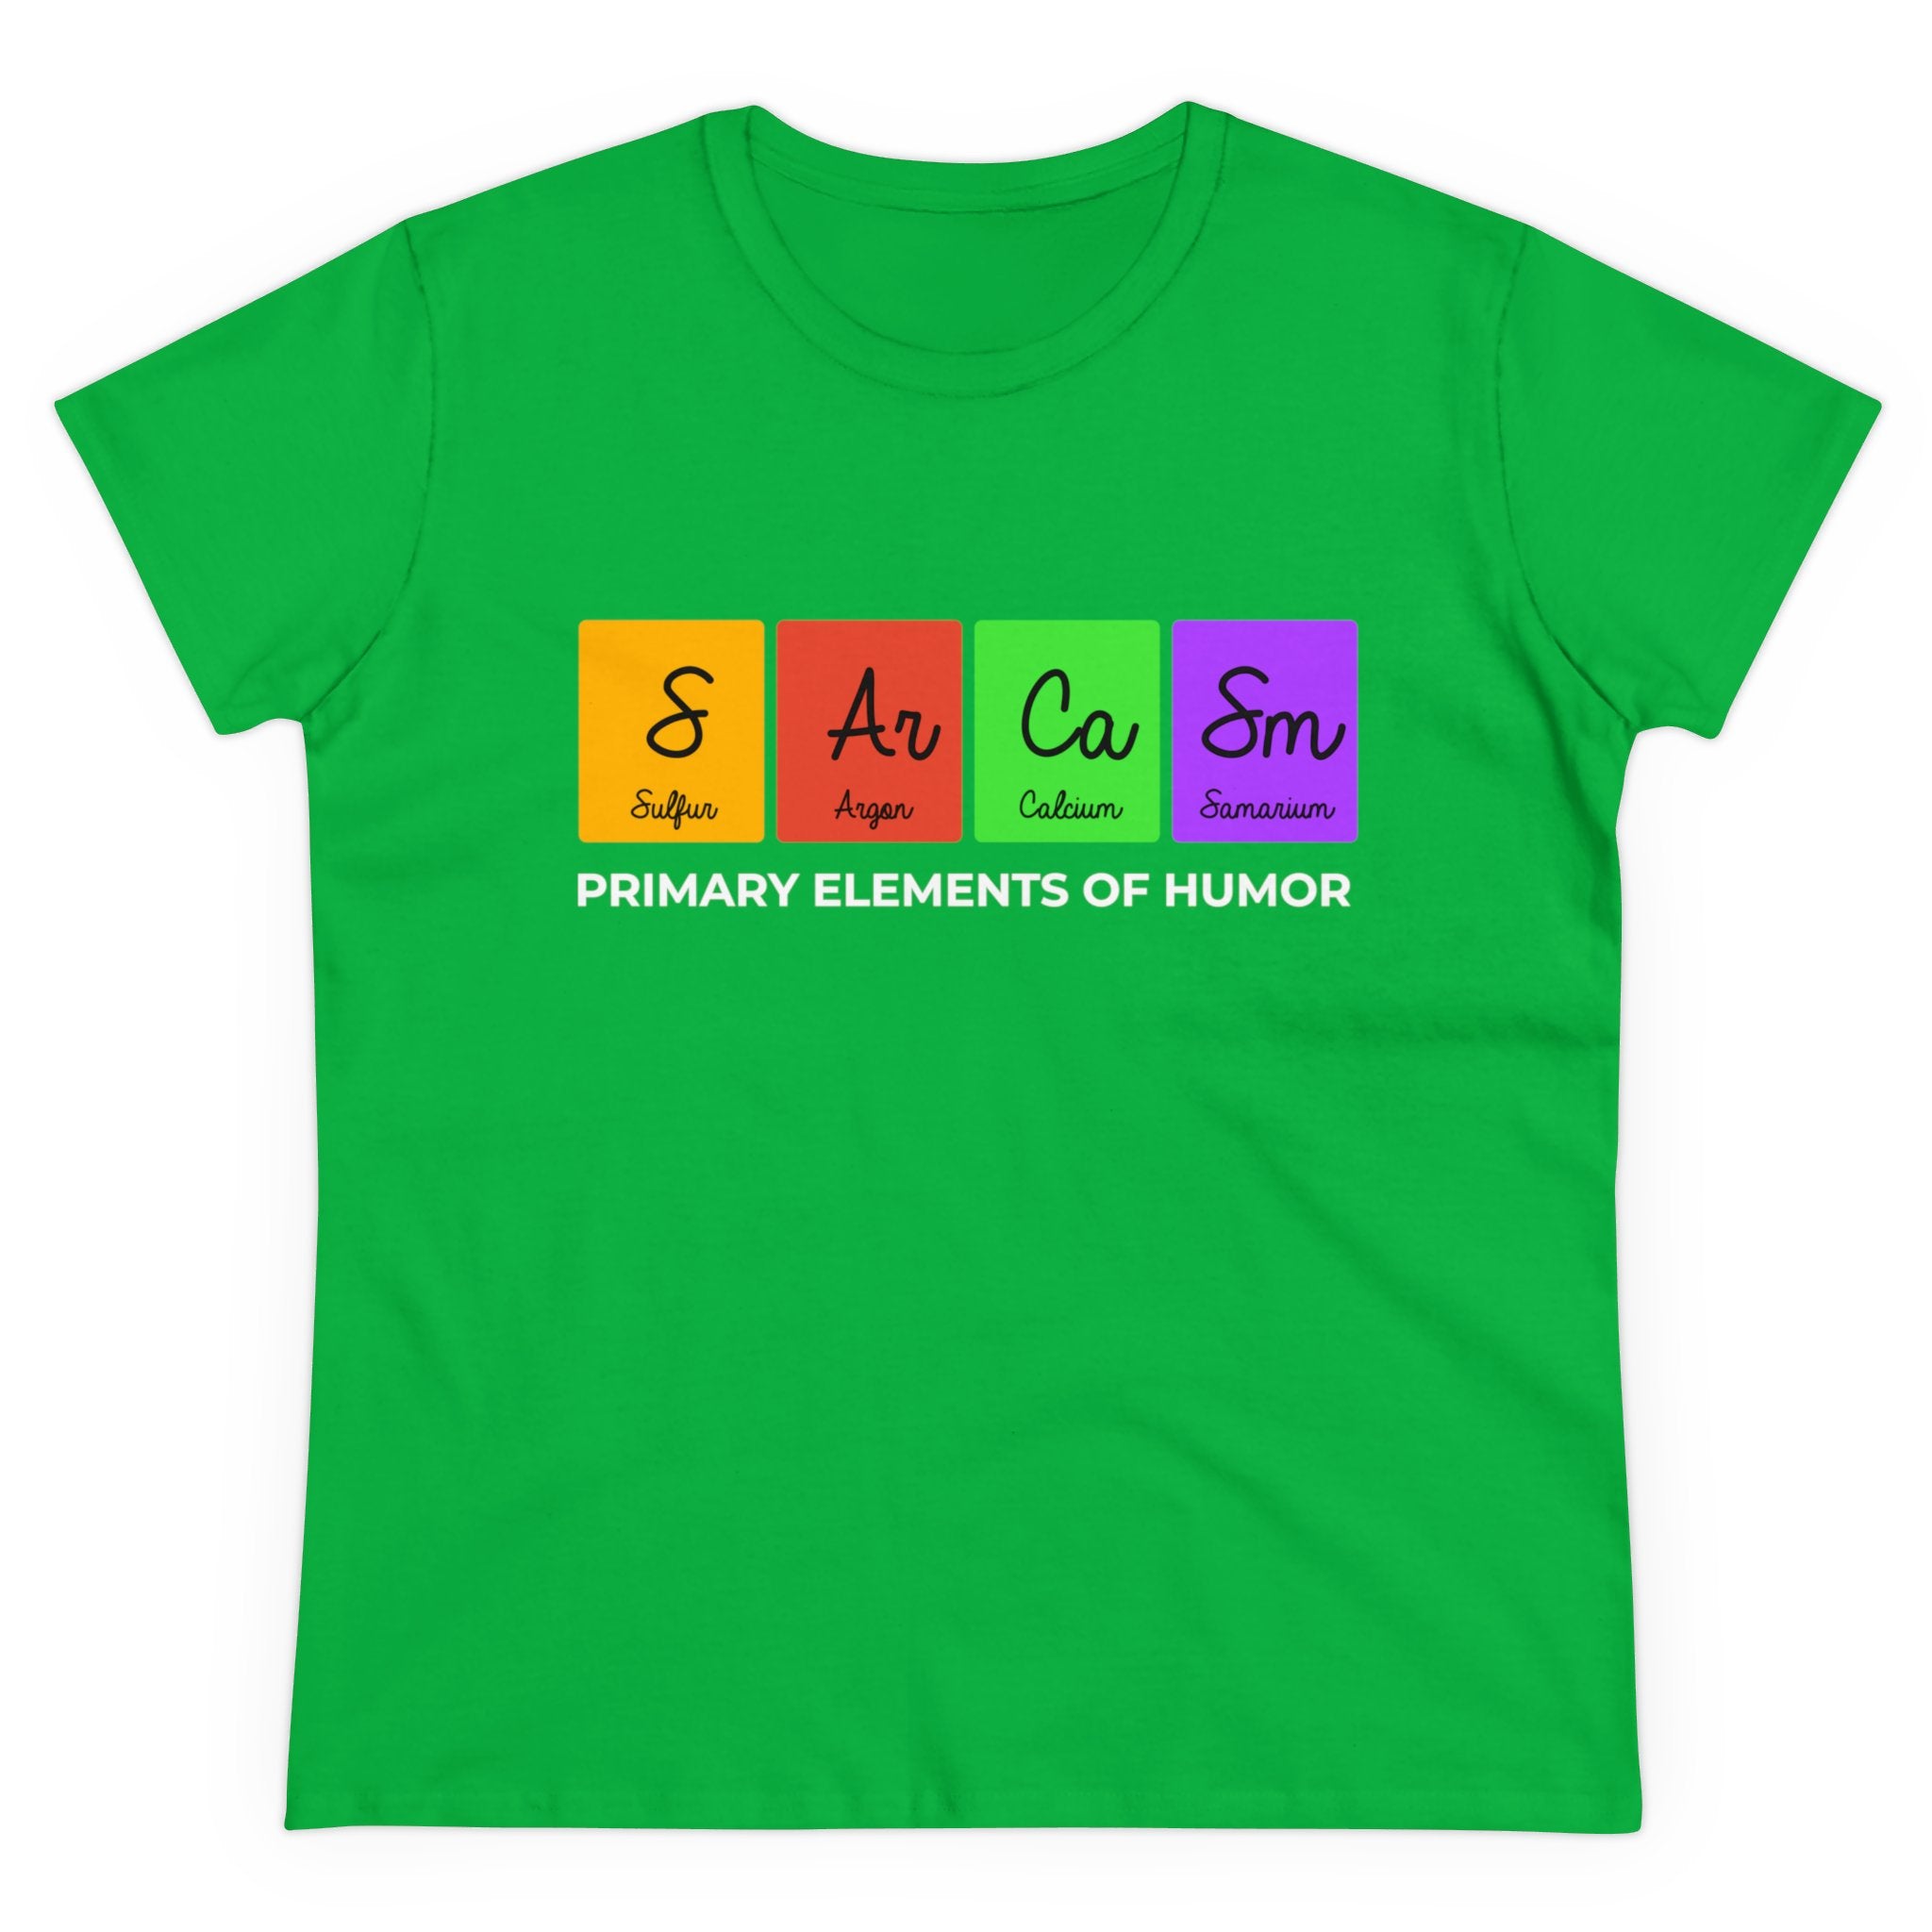 A green S-Ar-Ca-Sm - Women's Tee featuring a playful S-Ar-Ca-Sm design with element symbols for Sulfur (S), Argon (Ar), Calcium (Ca), and Samarium (Sm), all crafted from soft, comfortable cotton. Titled "Primary Elements of Humor," it's perfect for anyone with a scientific sense of fun.